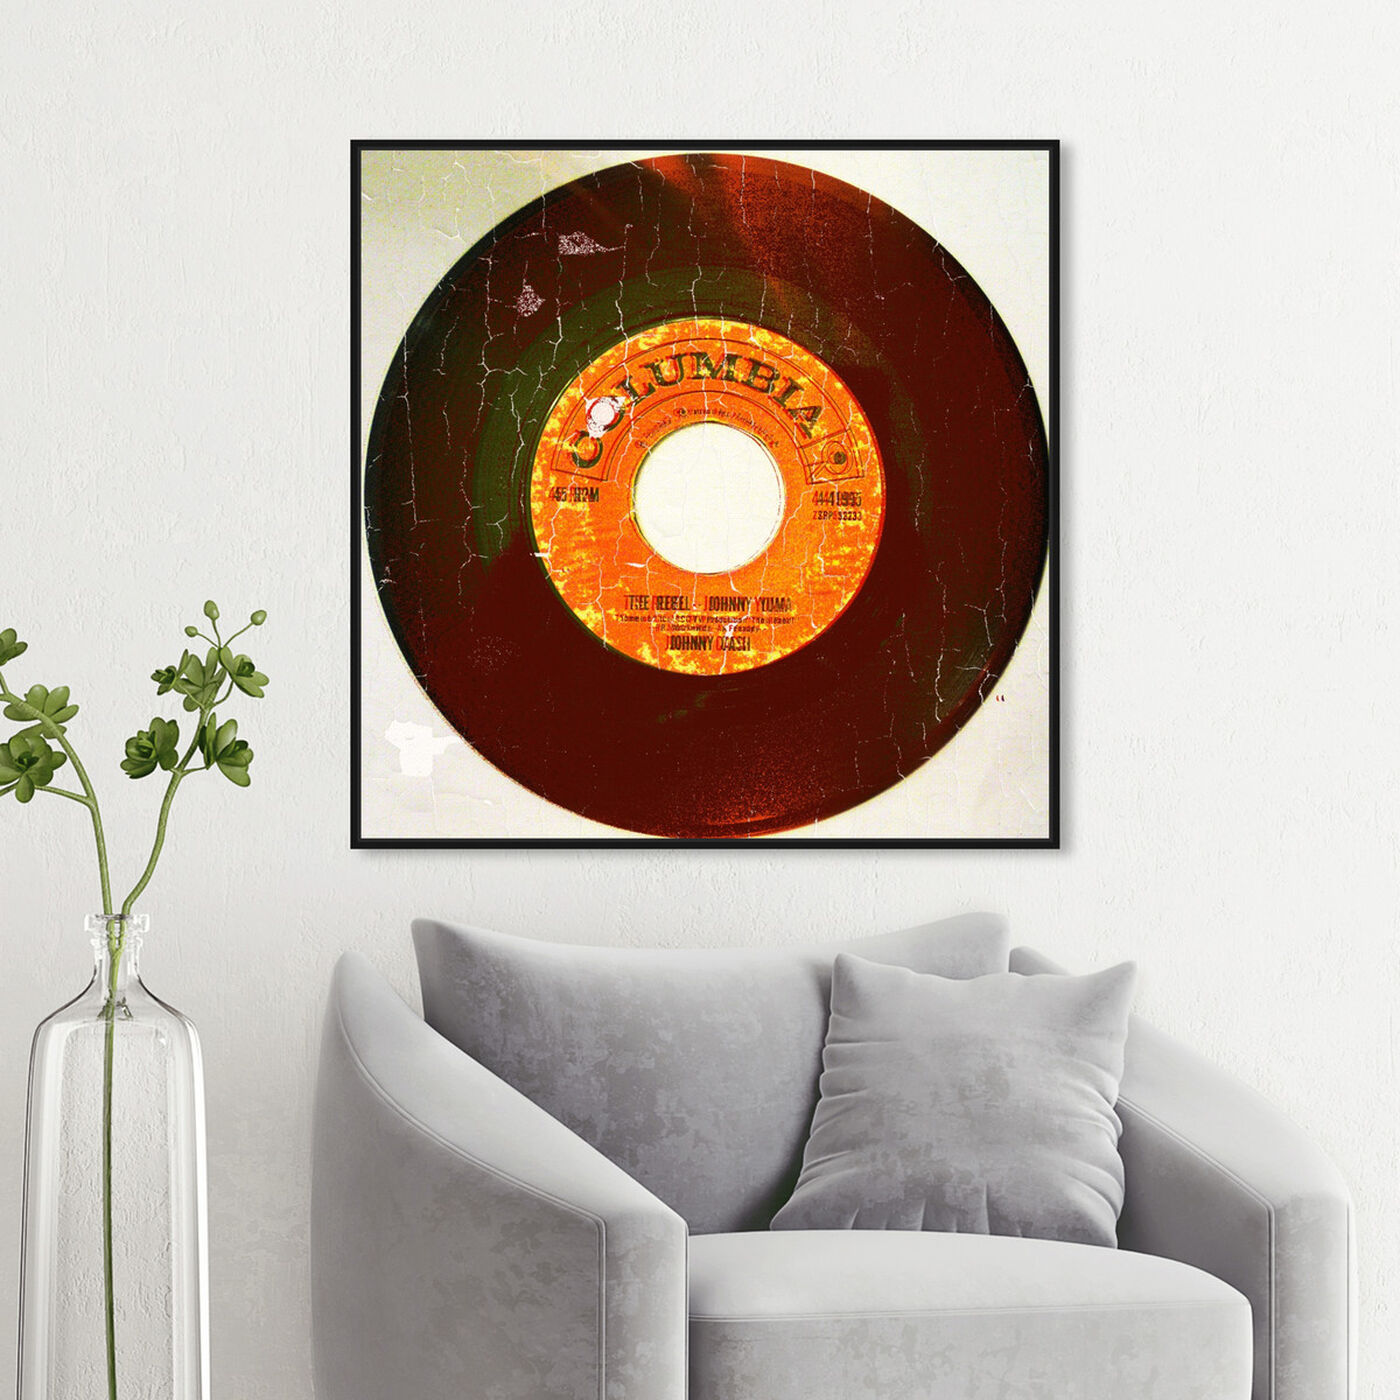 Hanging view of Rebel Vinyl featuring music and dance and vinyl records art.